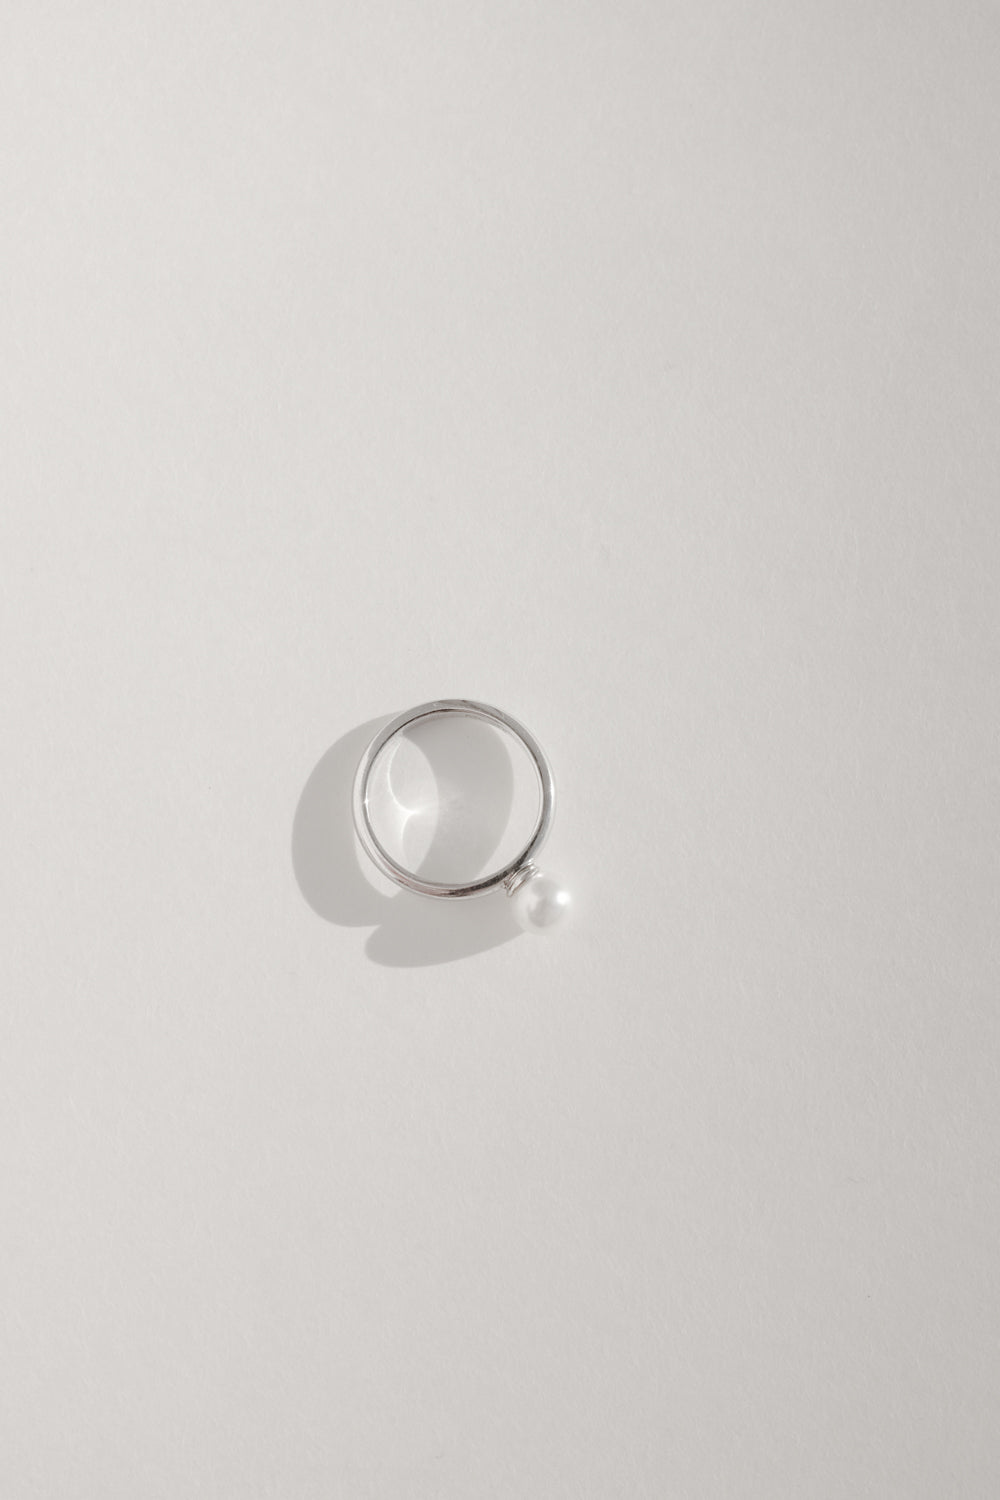 OFF WHITE PEARL STERLING SILVER VINTAGE RING